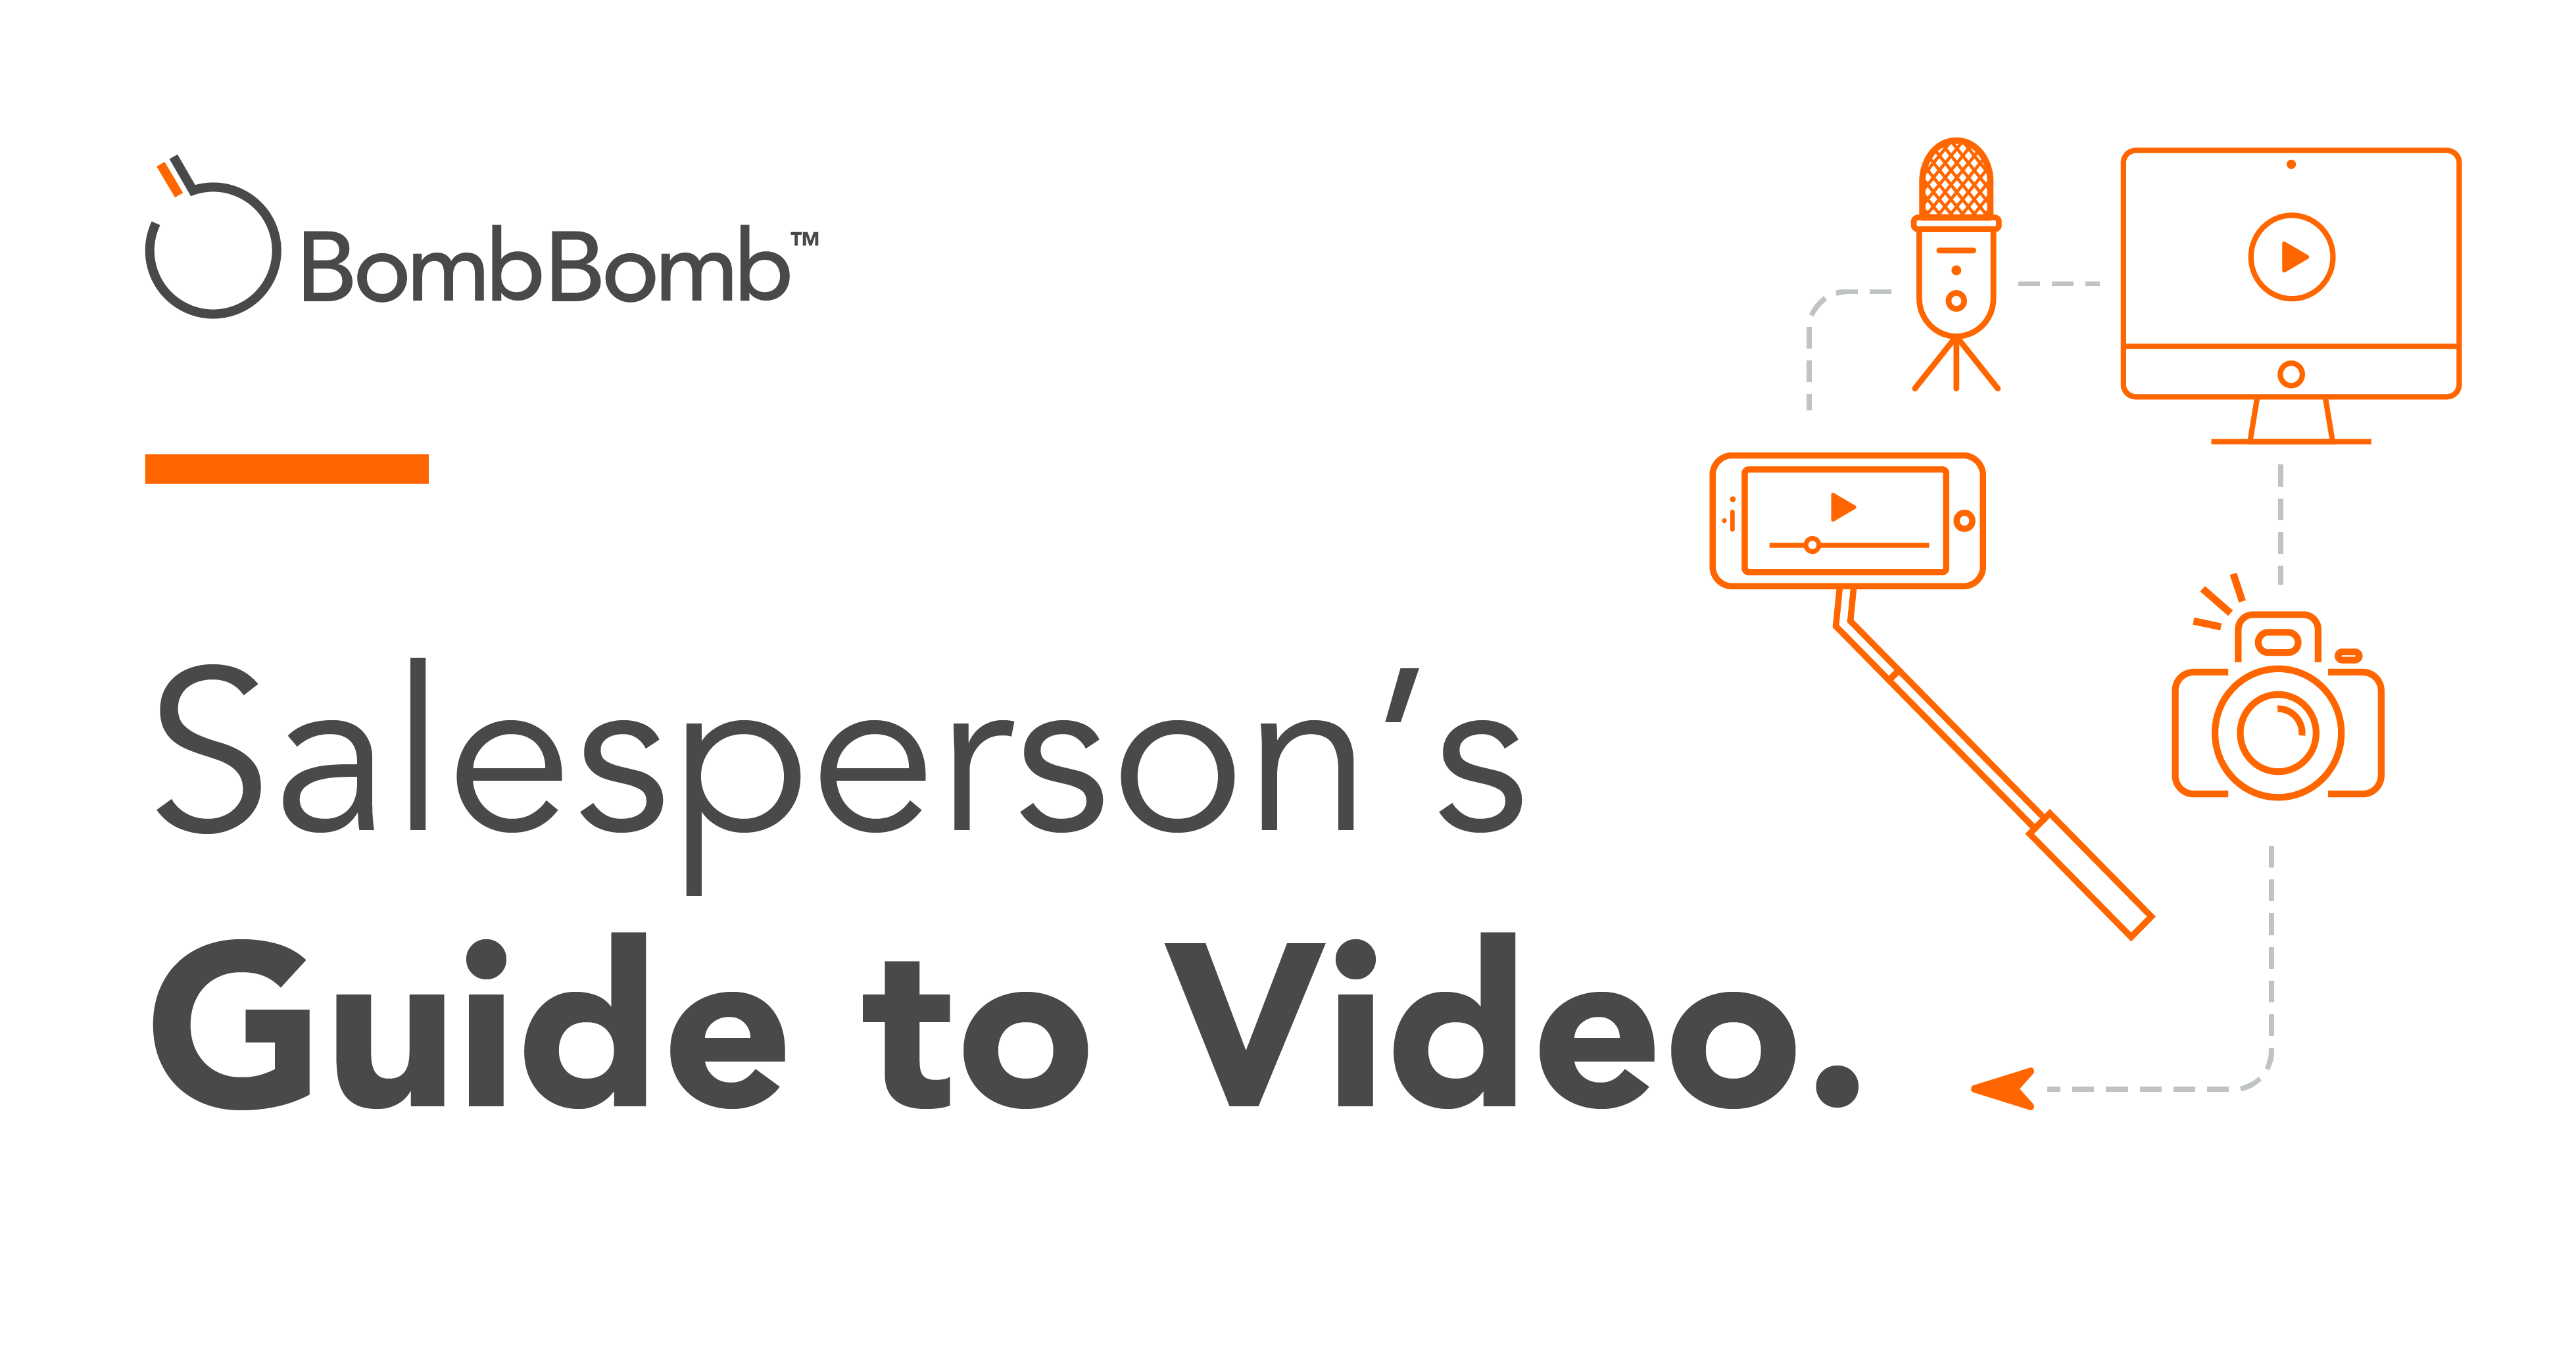 18 08 Salespersons Guide to Video Edits 02 01 | BombBomb